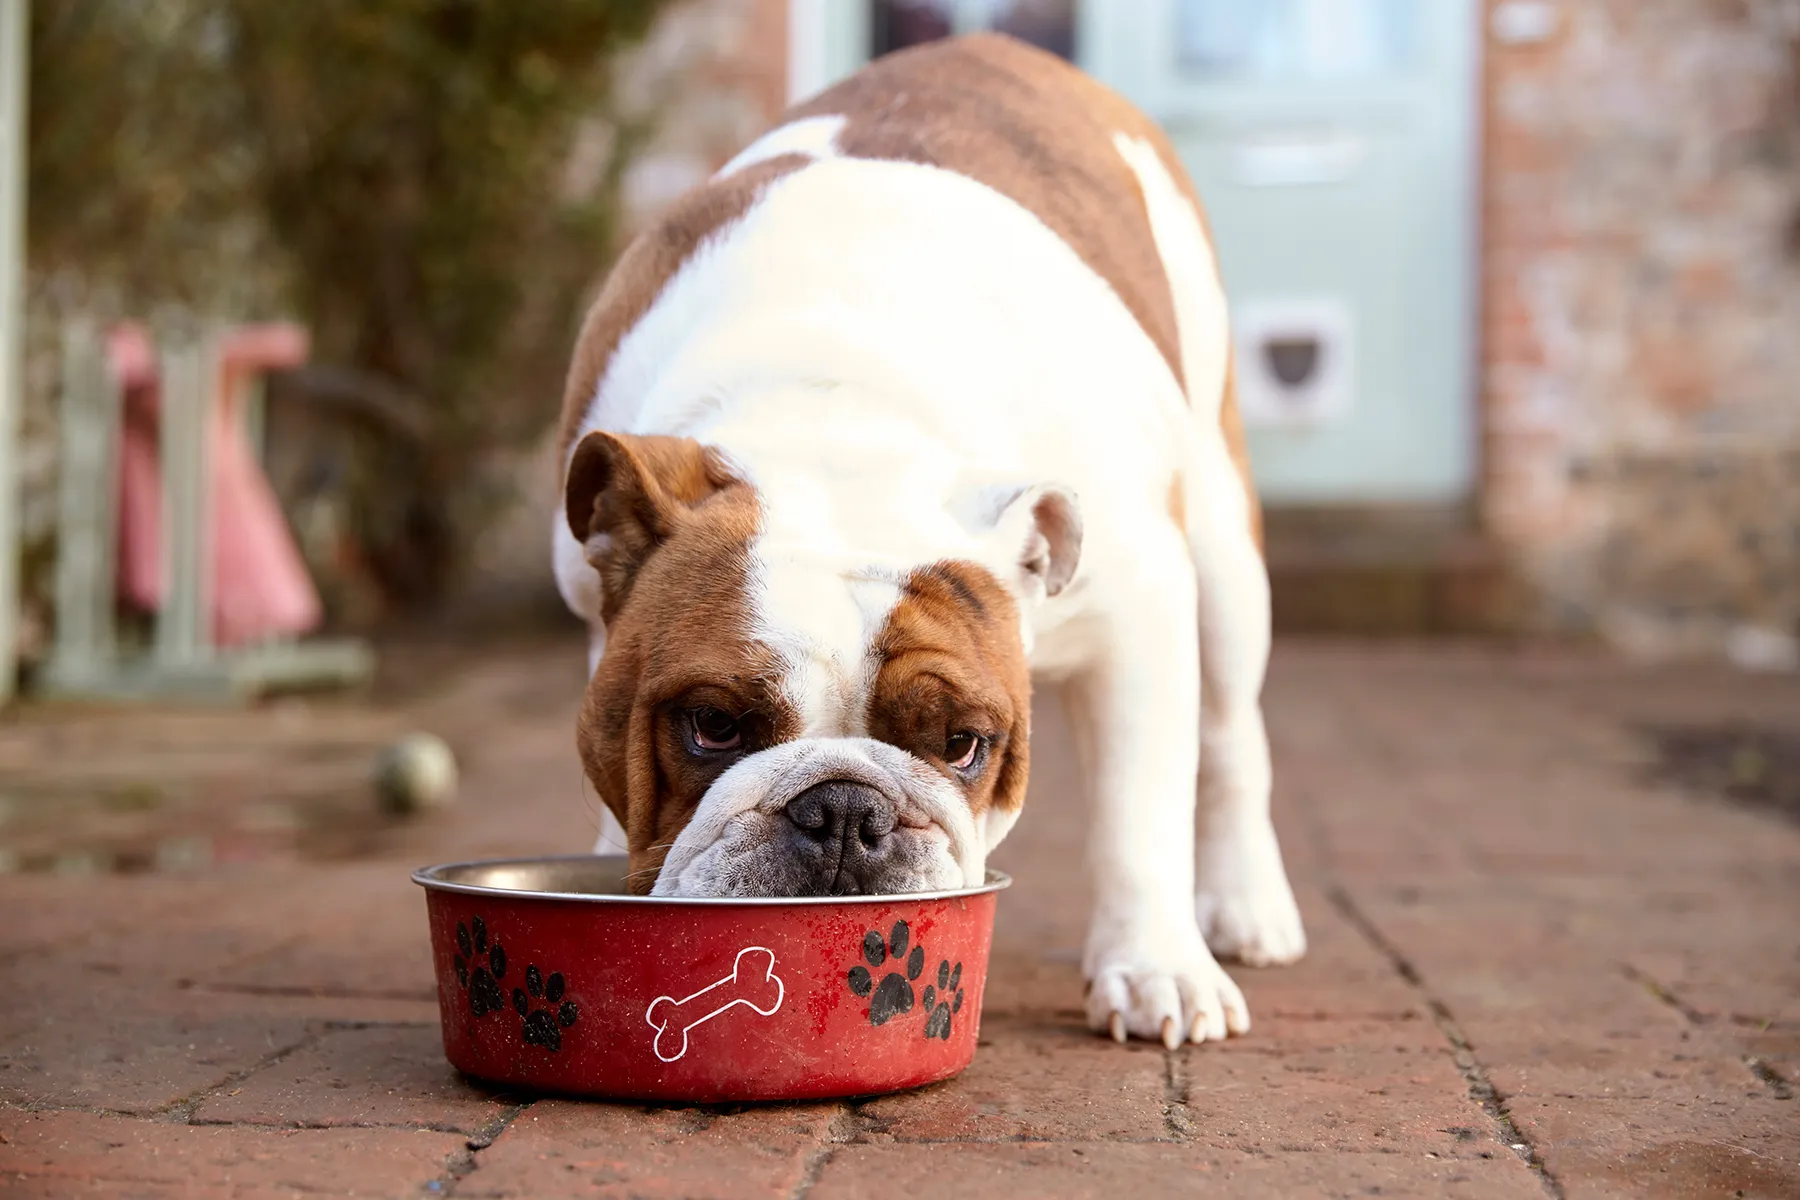 Dog Feeding Time: How Much and How Often?